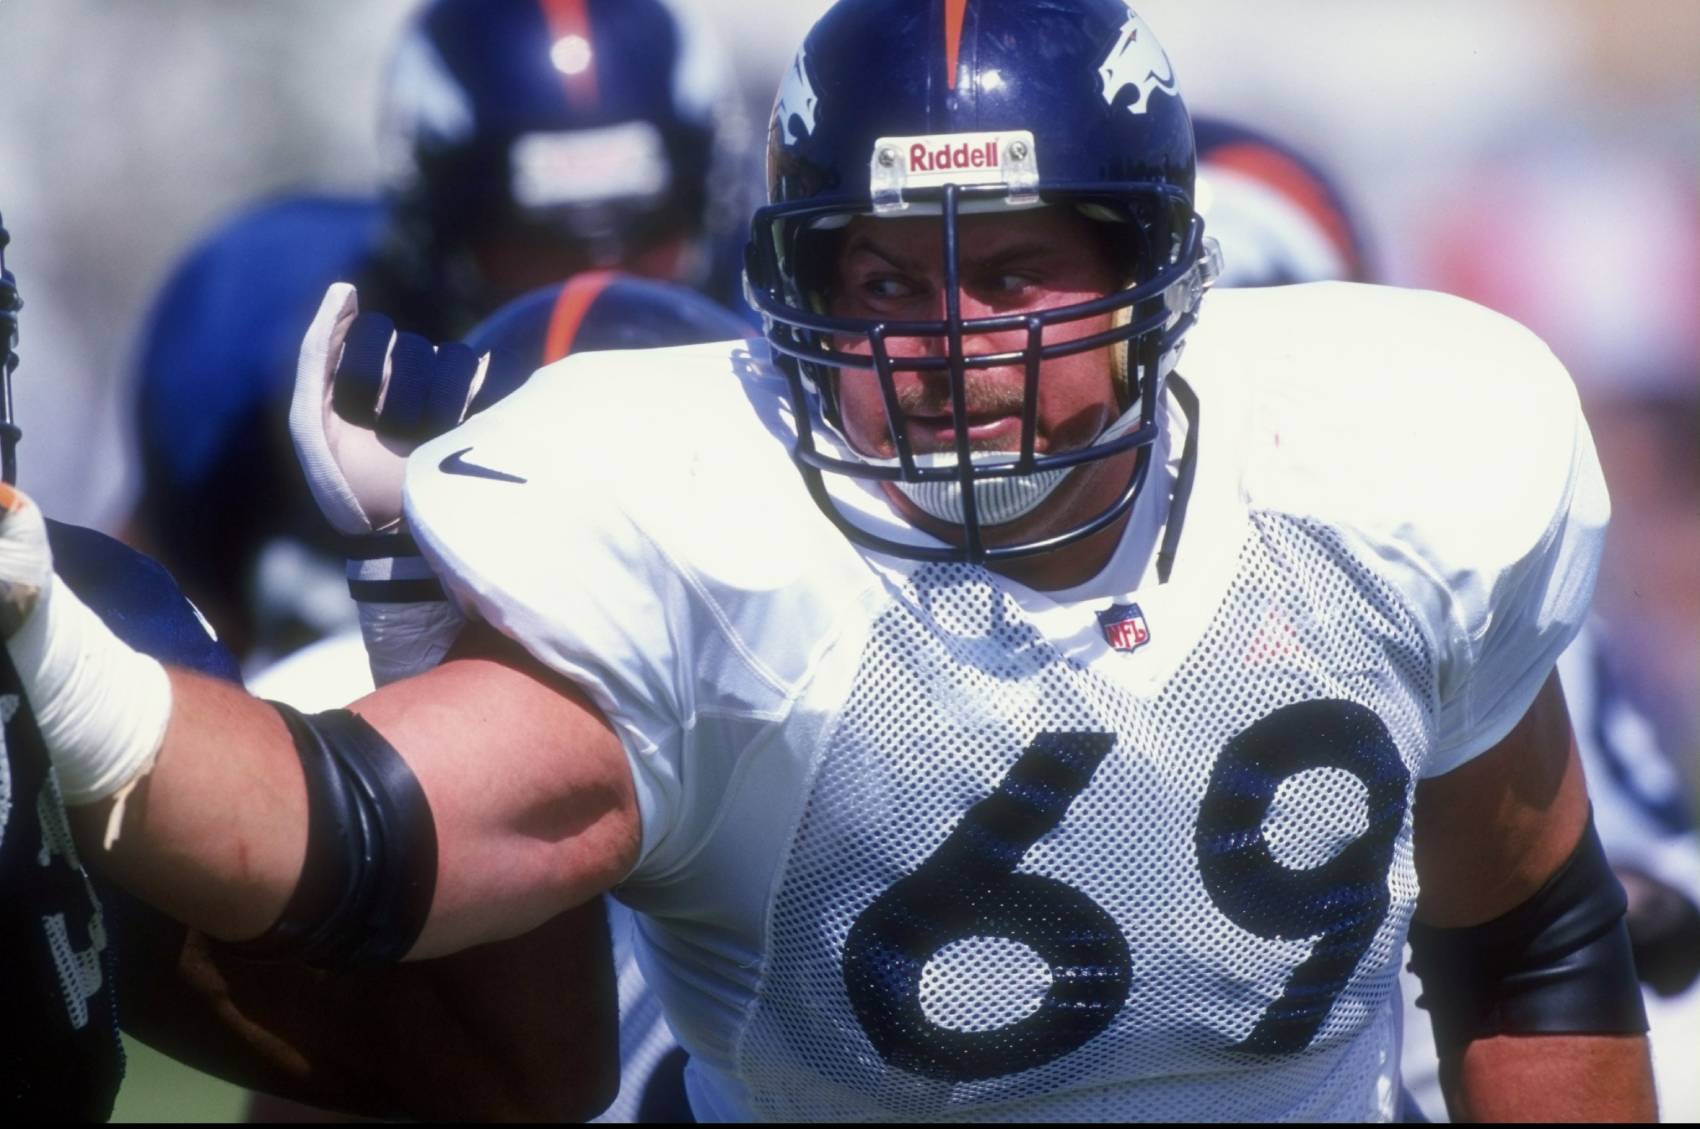 Ex-Denver Broncos offensive lineman Mark Schlereth overcame a learning disability to become a Super Bowl champion.